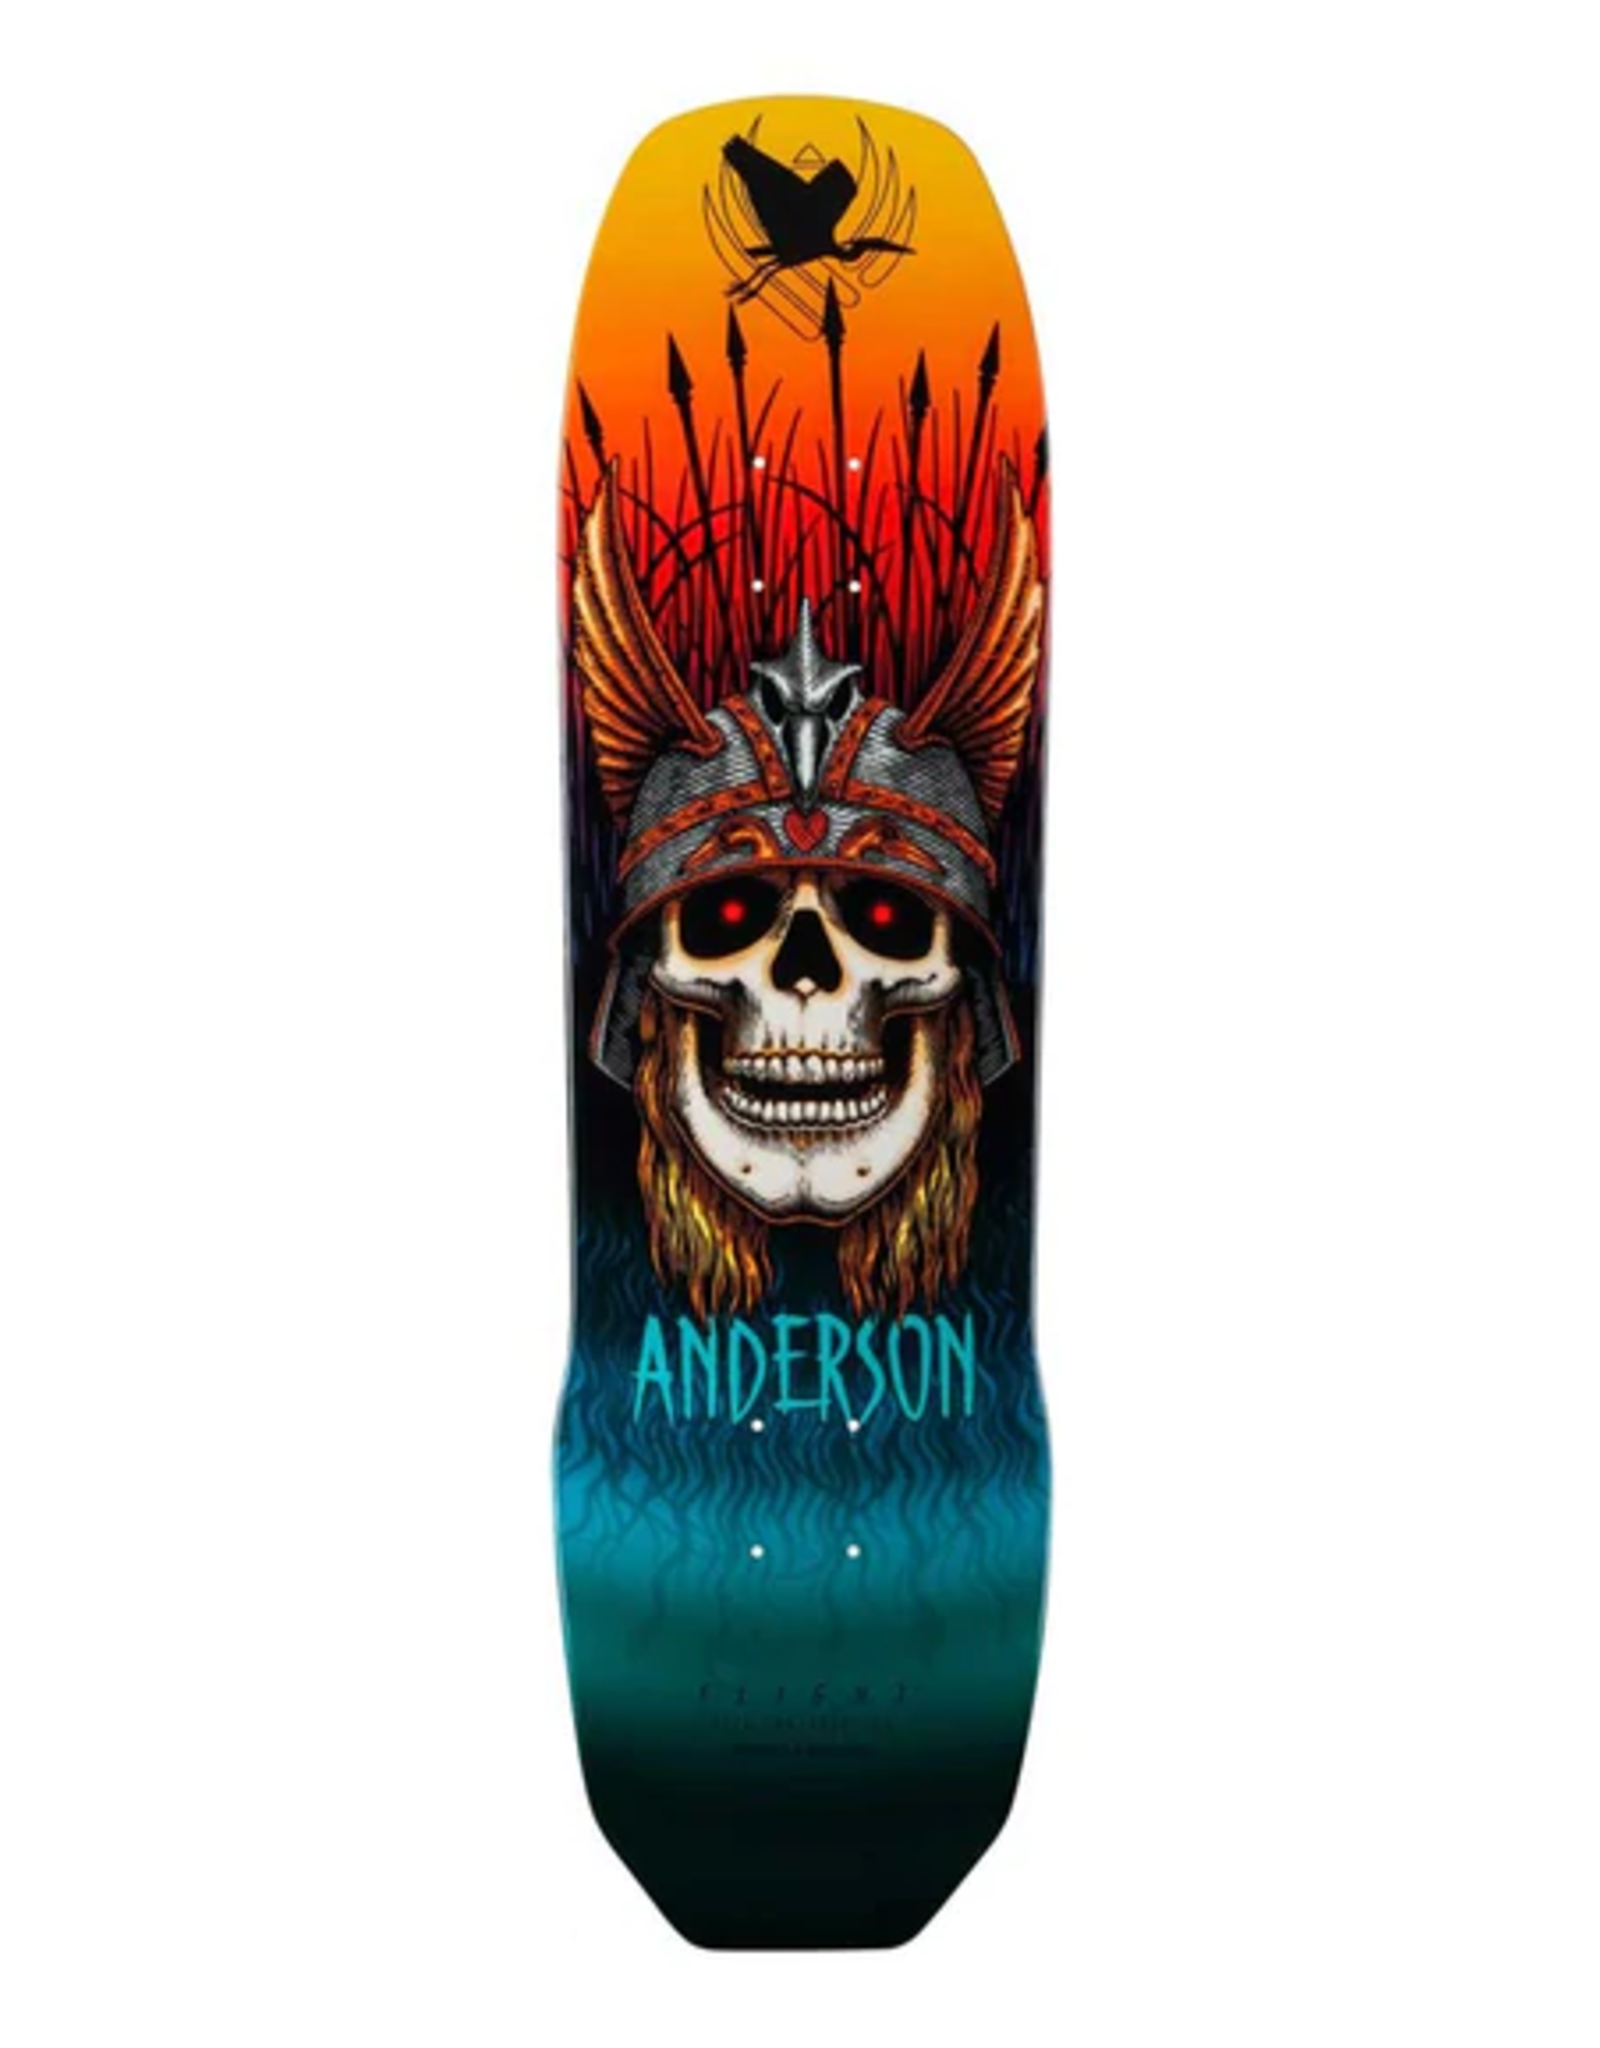 Powell - ANDY ANDERSON 290 FLIGHT DECK - 9.13"